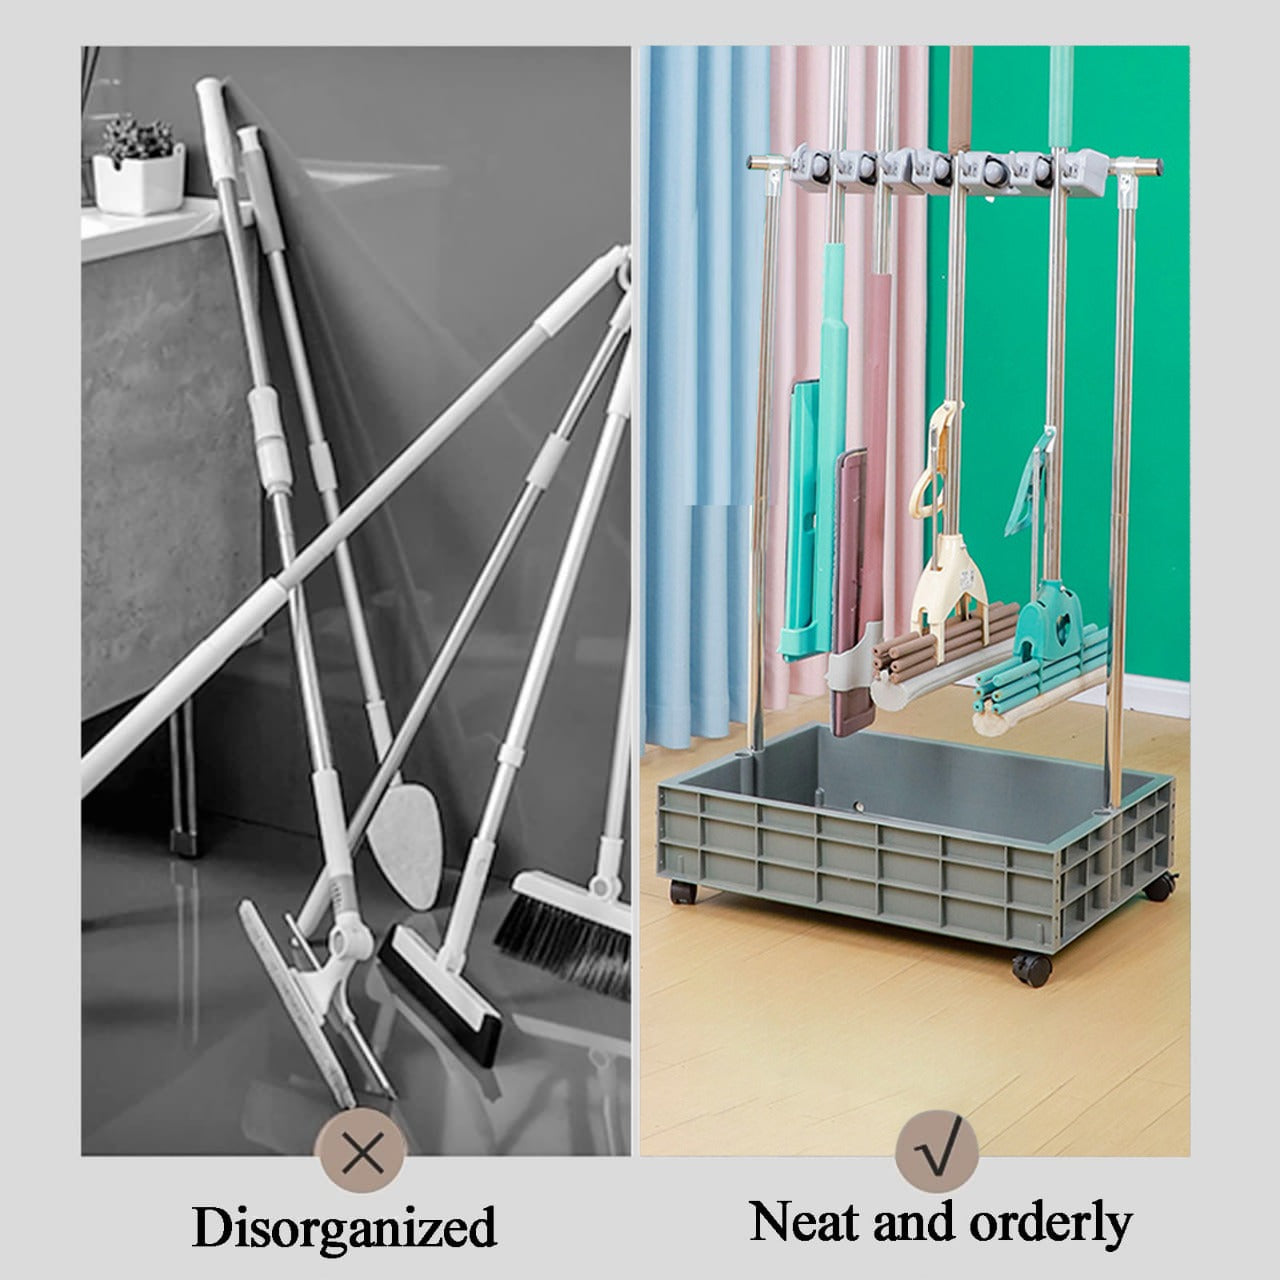 Mop and Broom are Organized in a Movable Mop Broom Holder.